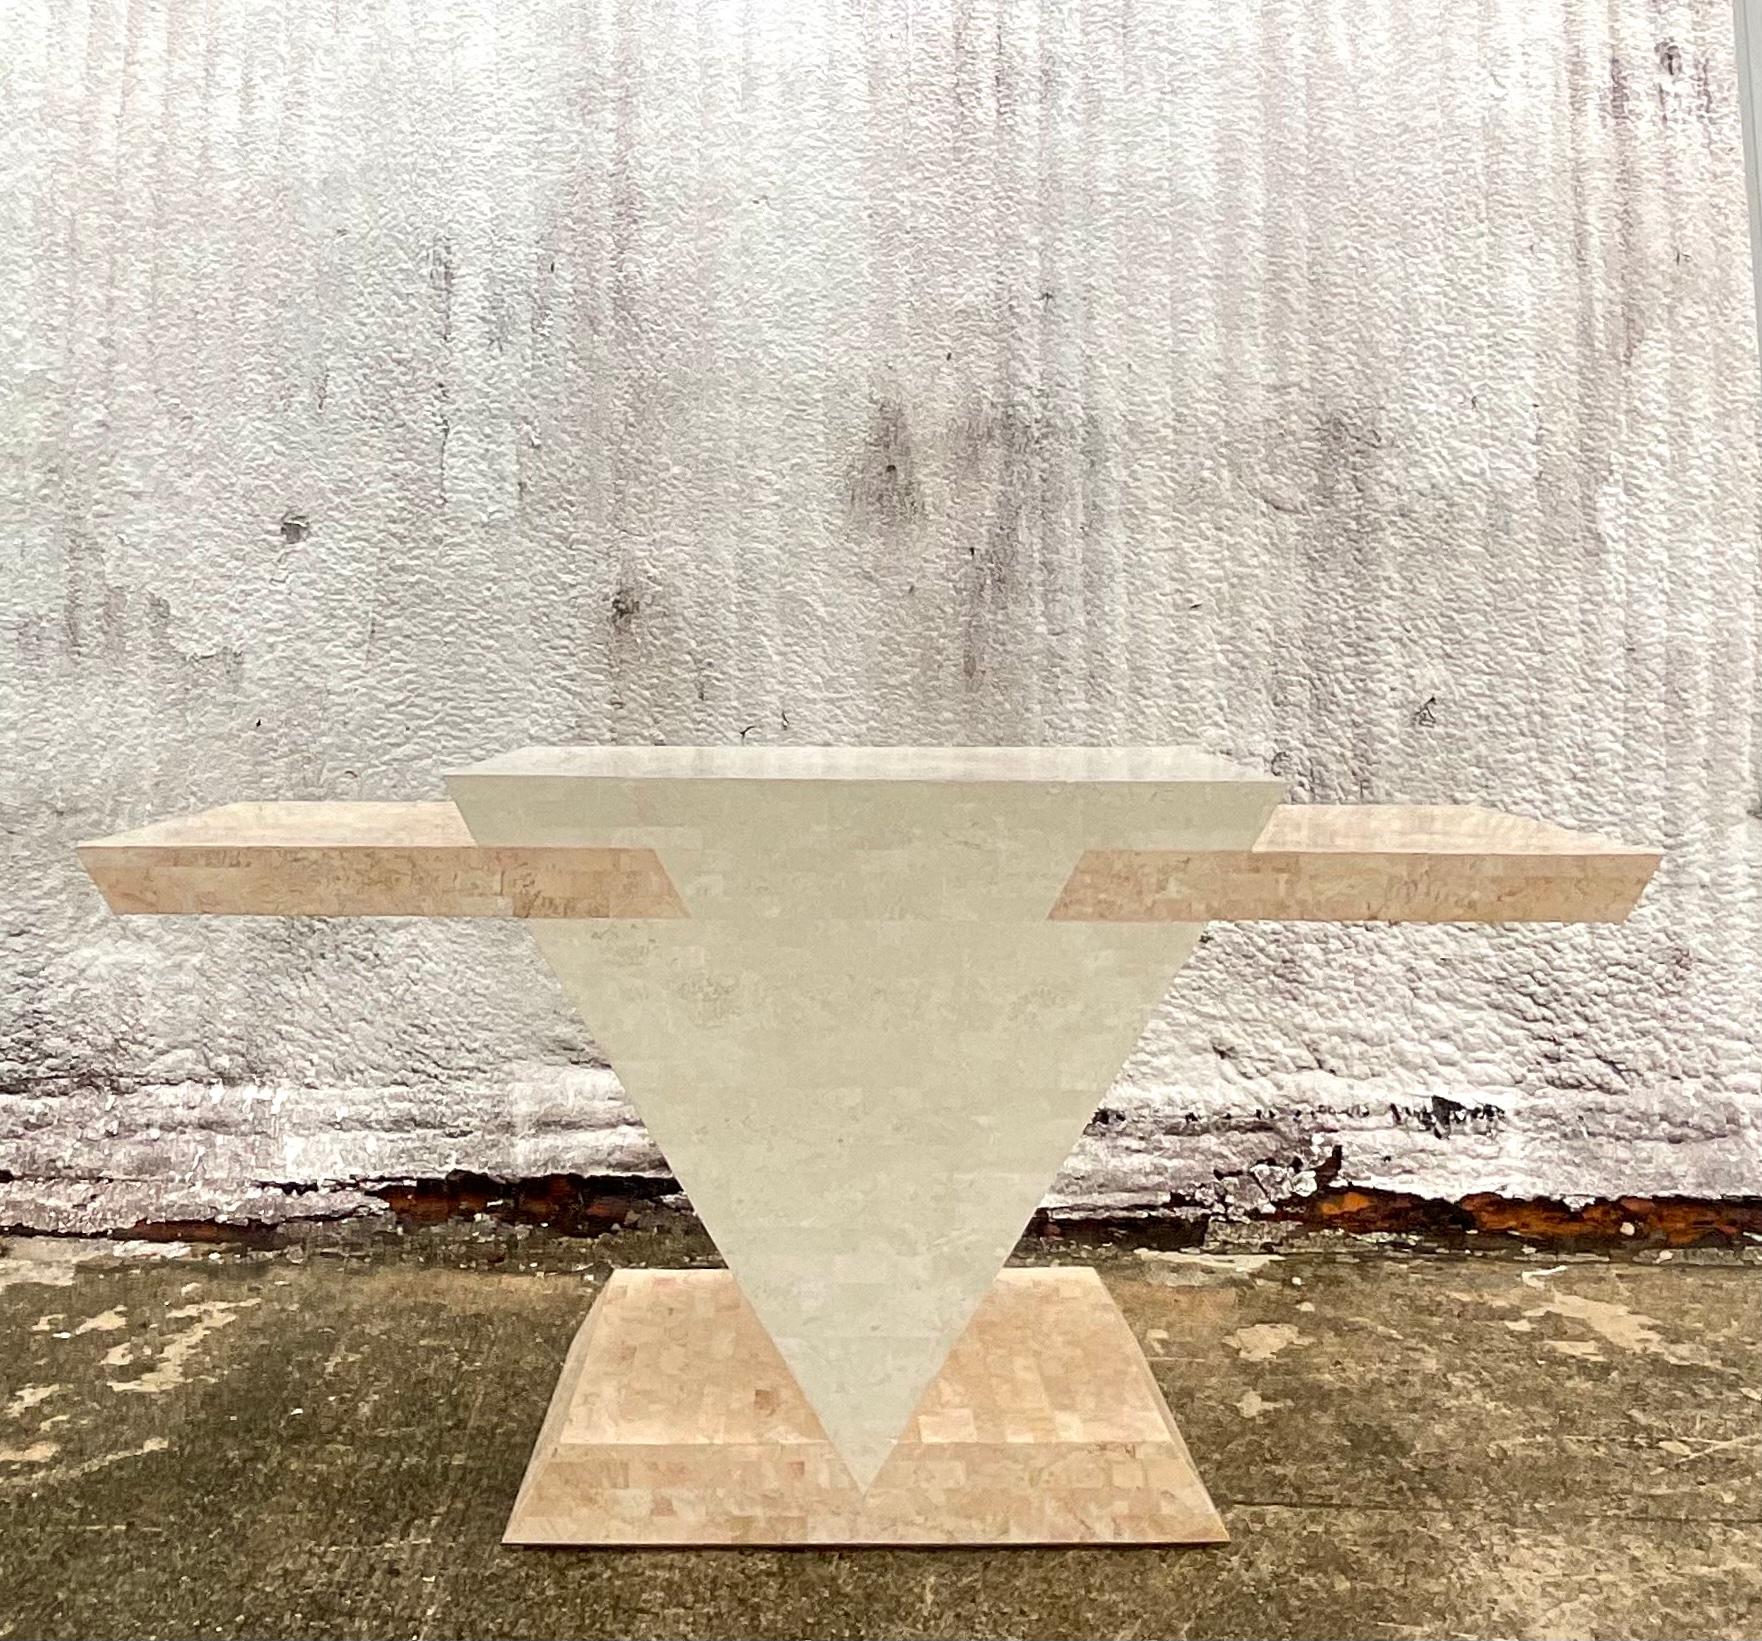 Fantastic vintage Postmodern credenza. Beautiful two tone tessellated stone in a chic angular shape. A striking statement piece. Acquired from a Palm Beach estate.